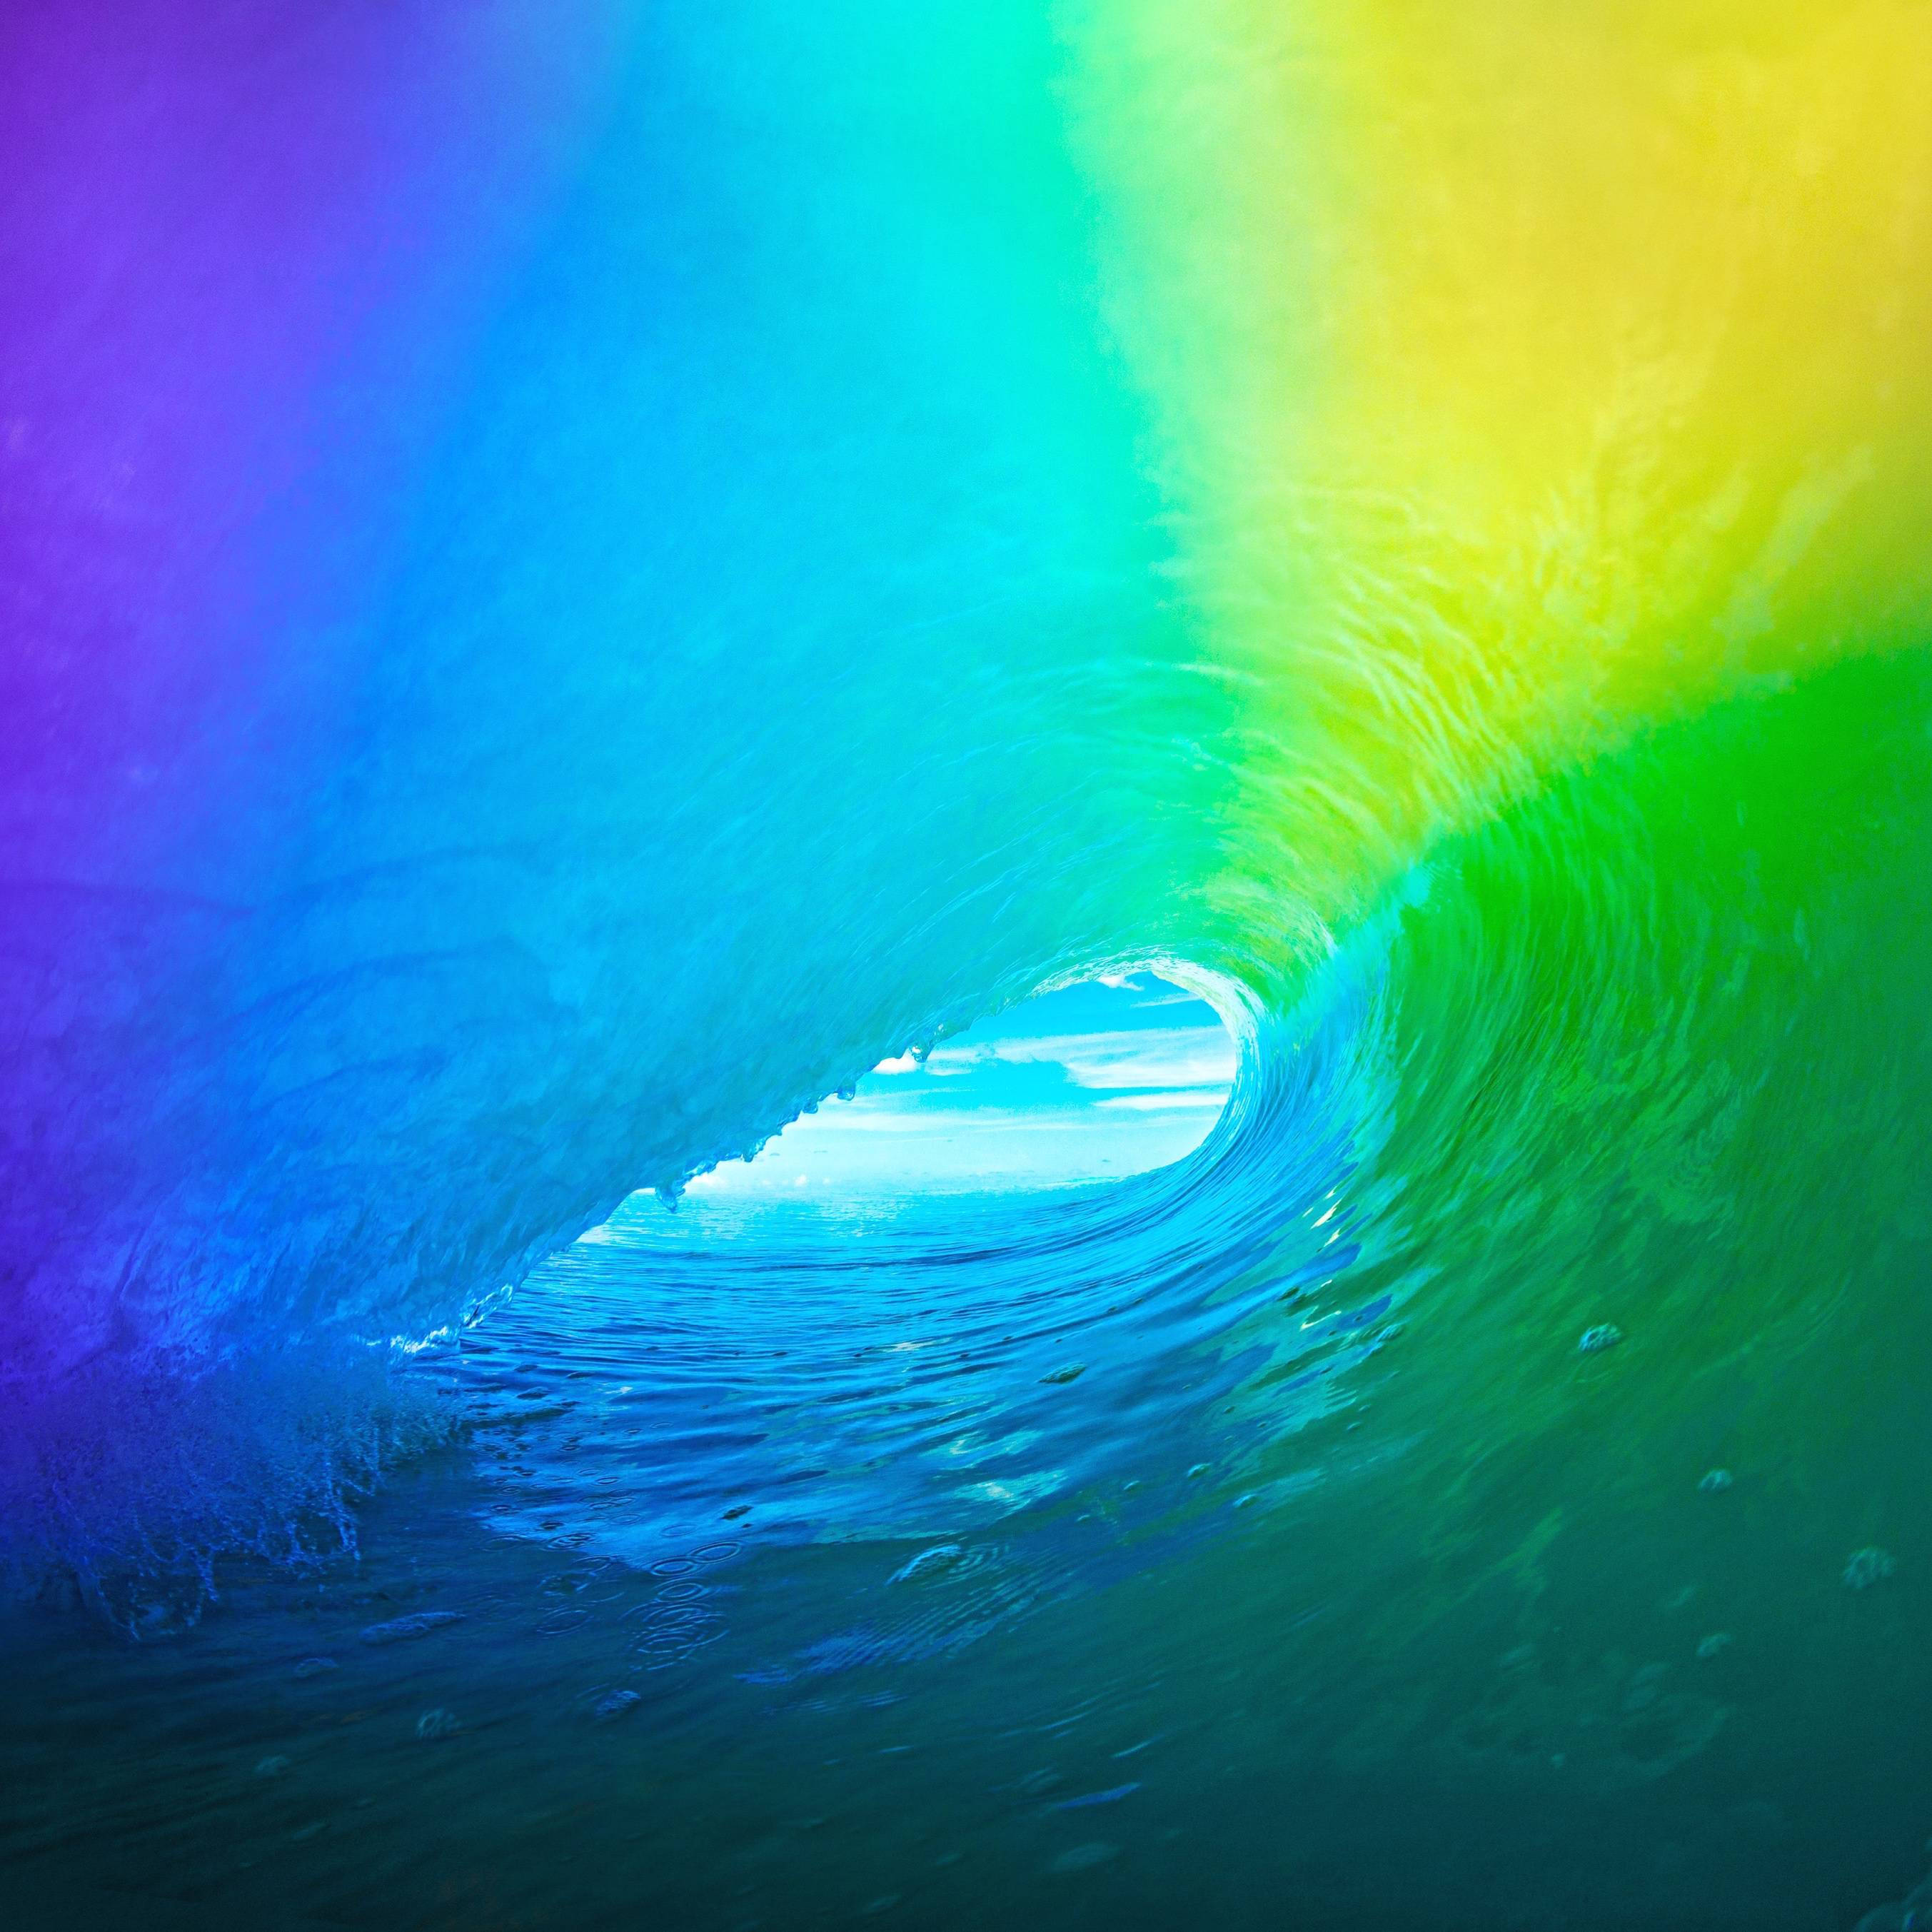 Fascinating Waves As Official Ipad Theme Picture